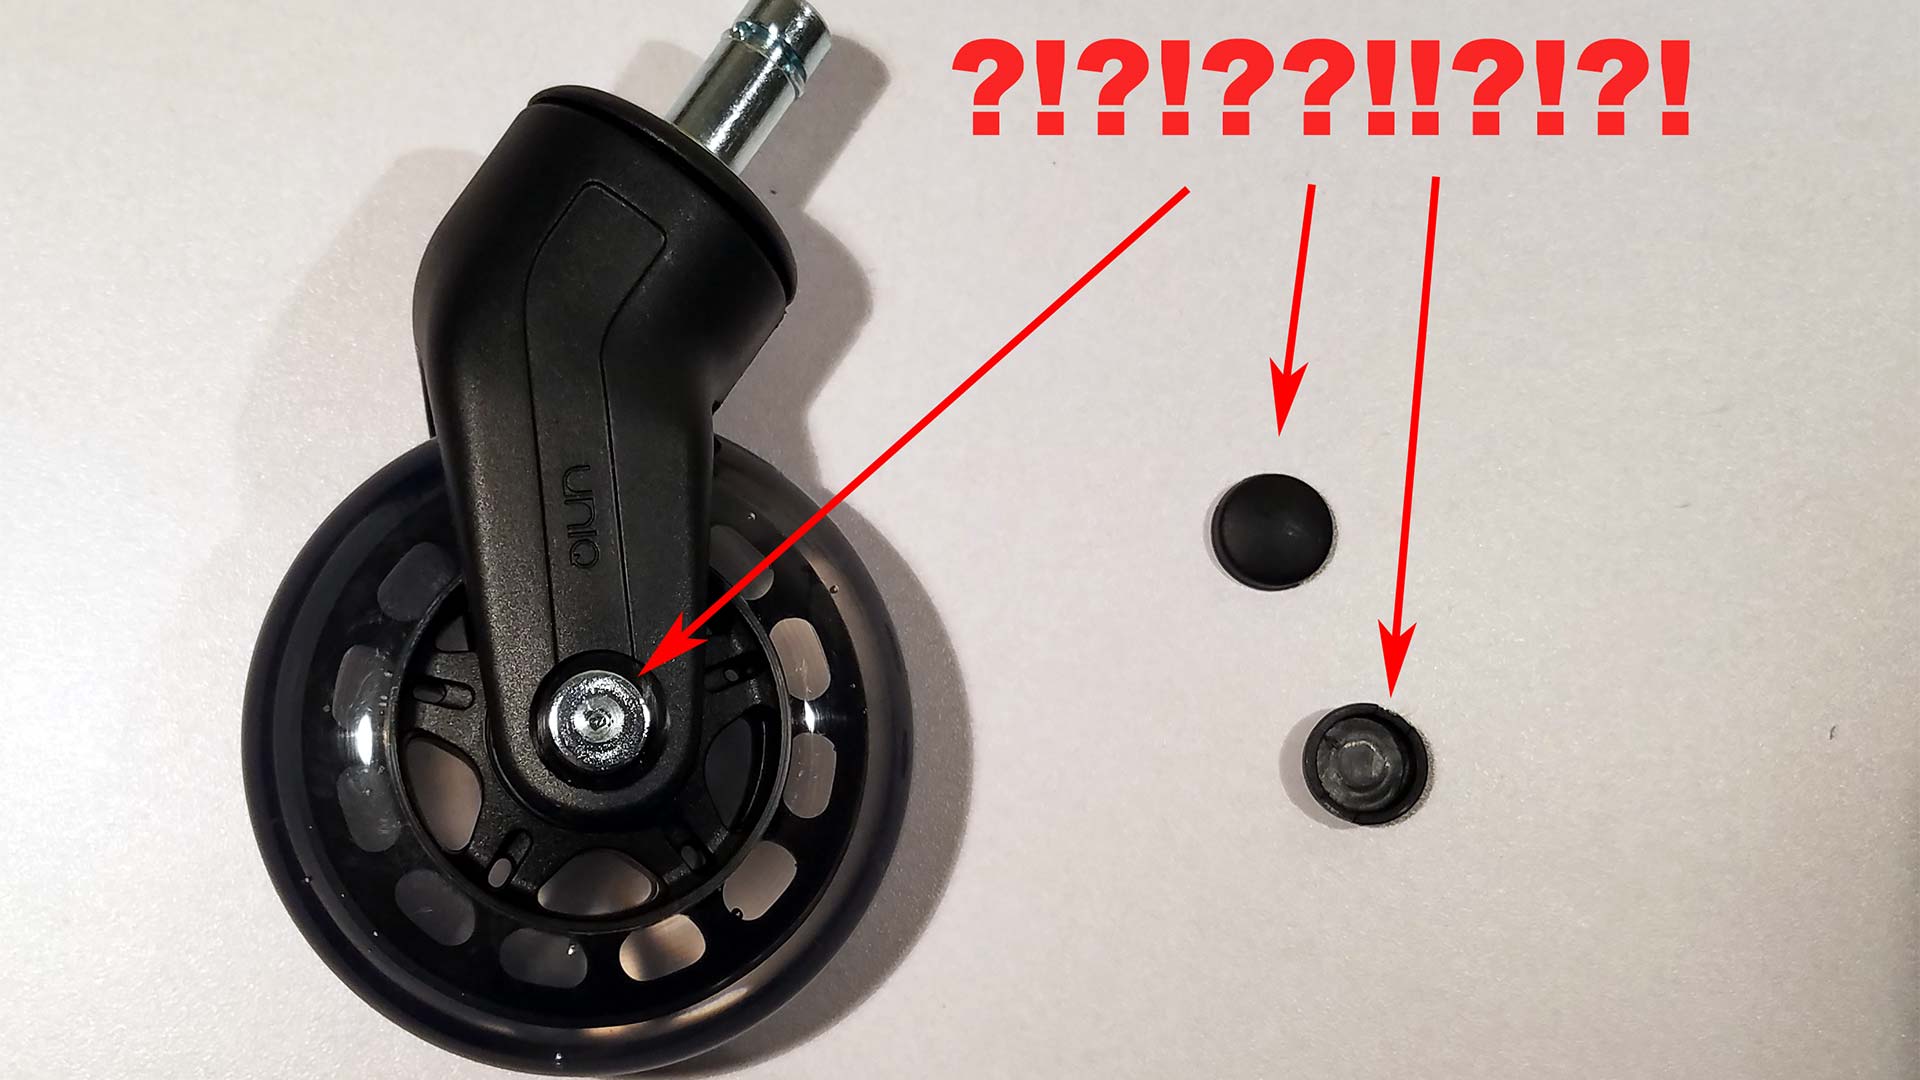 plastic caps falling out of the wheels instantly.